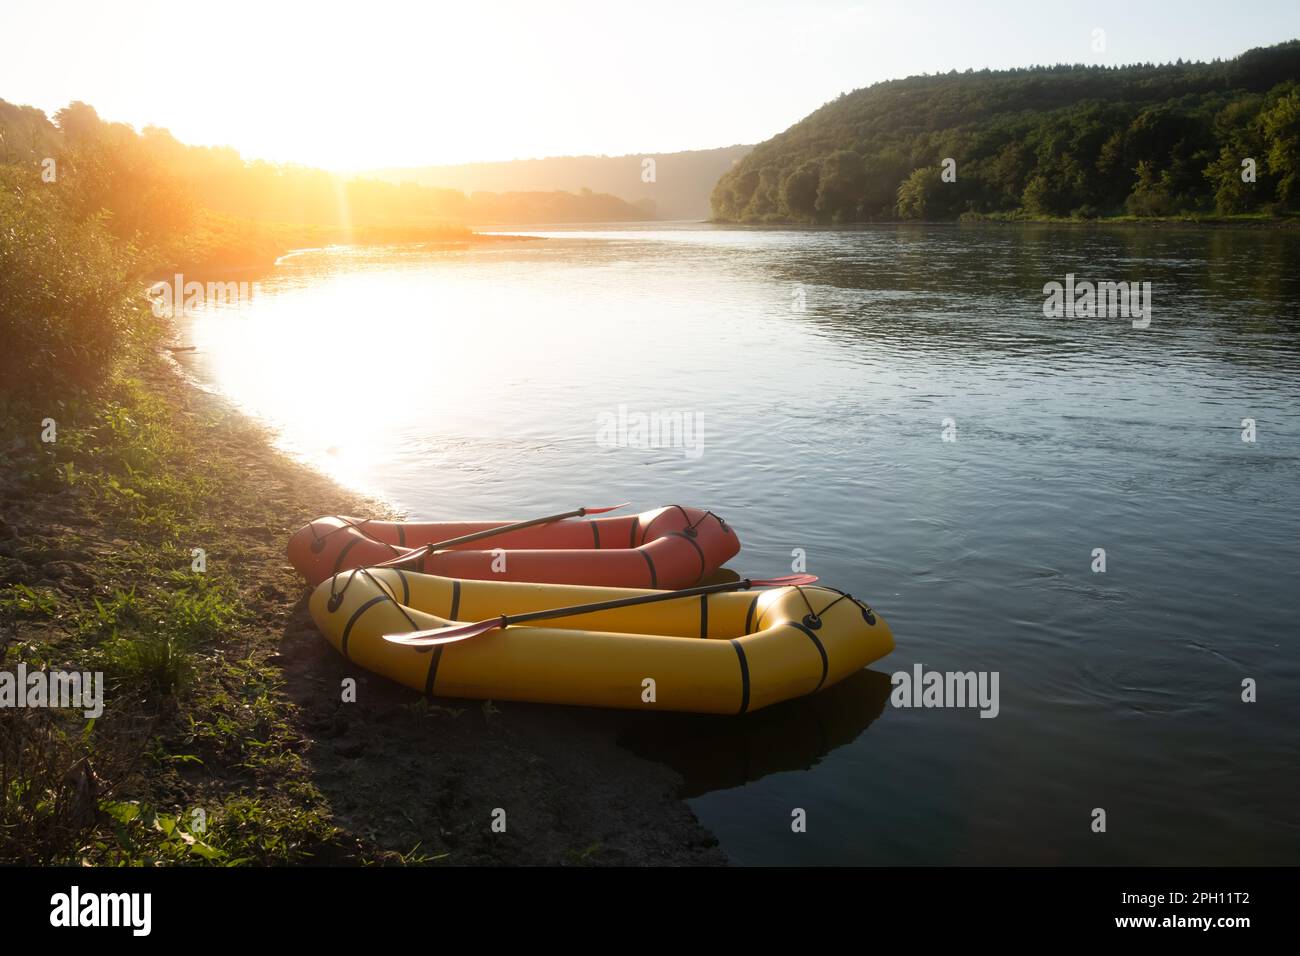 Orange and yellow packrafts rubber boats with padles on a sunrise river. Packrafting. Active lifestile concept Stock Photo